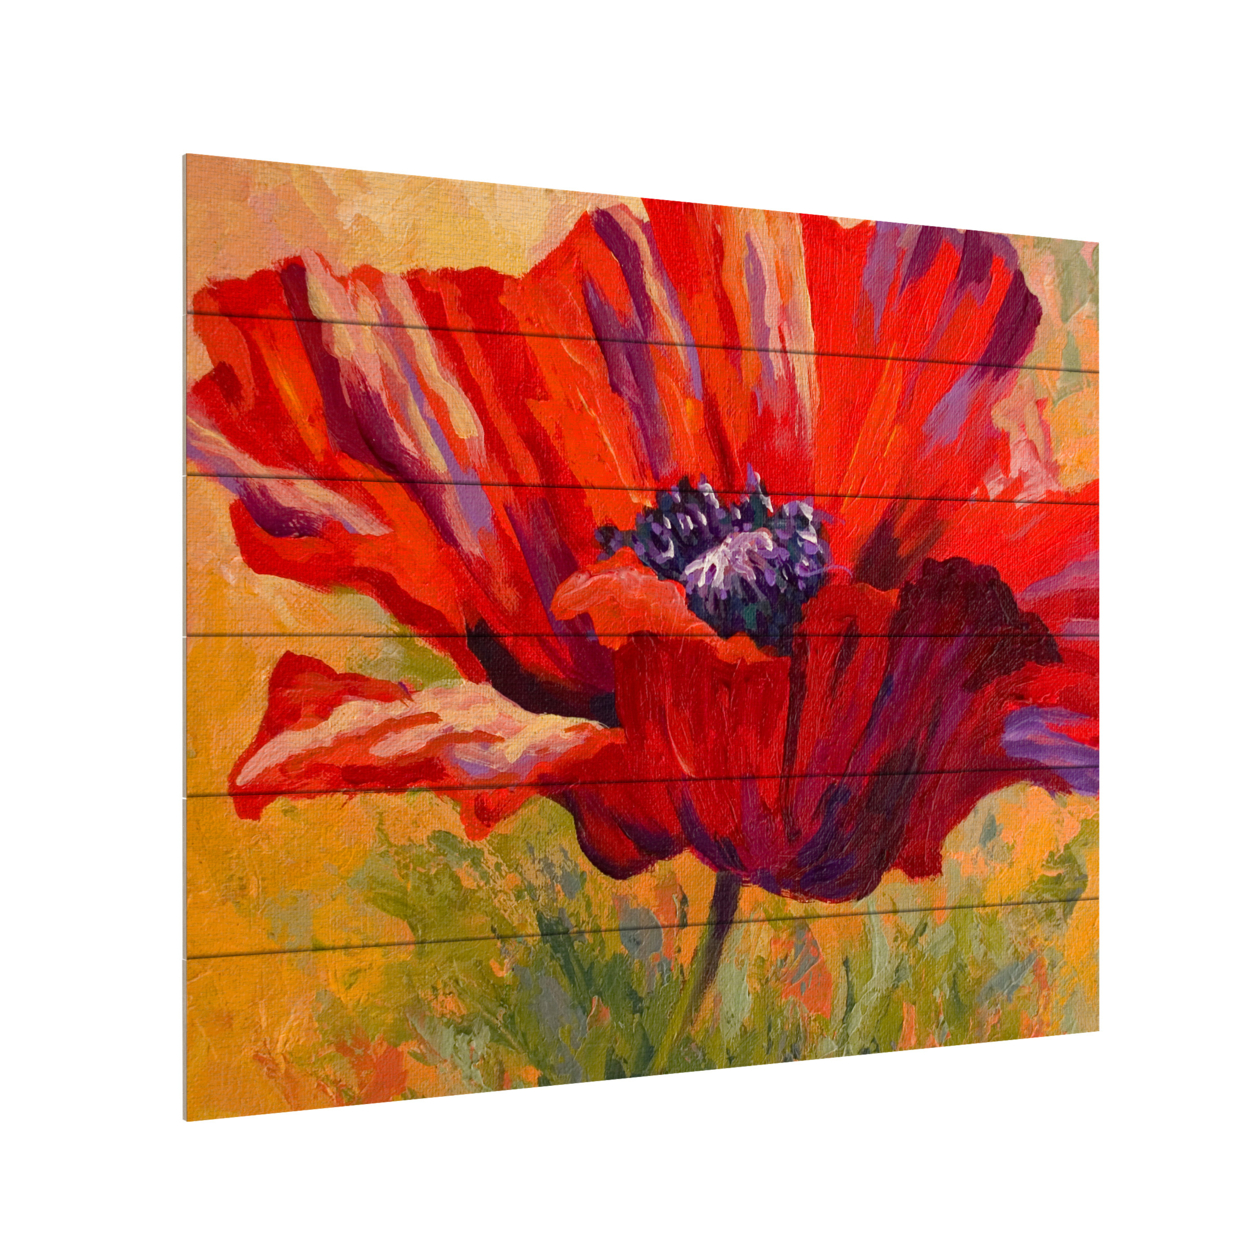 Wooden Slat Art 18 X 22 Inches Titled Red Poppy II Ready To Hang Home Decor Picture